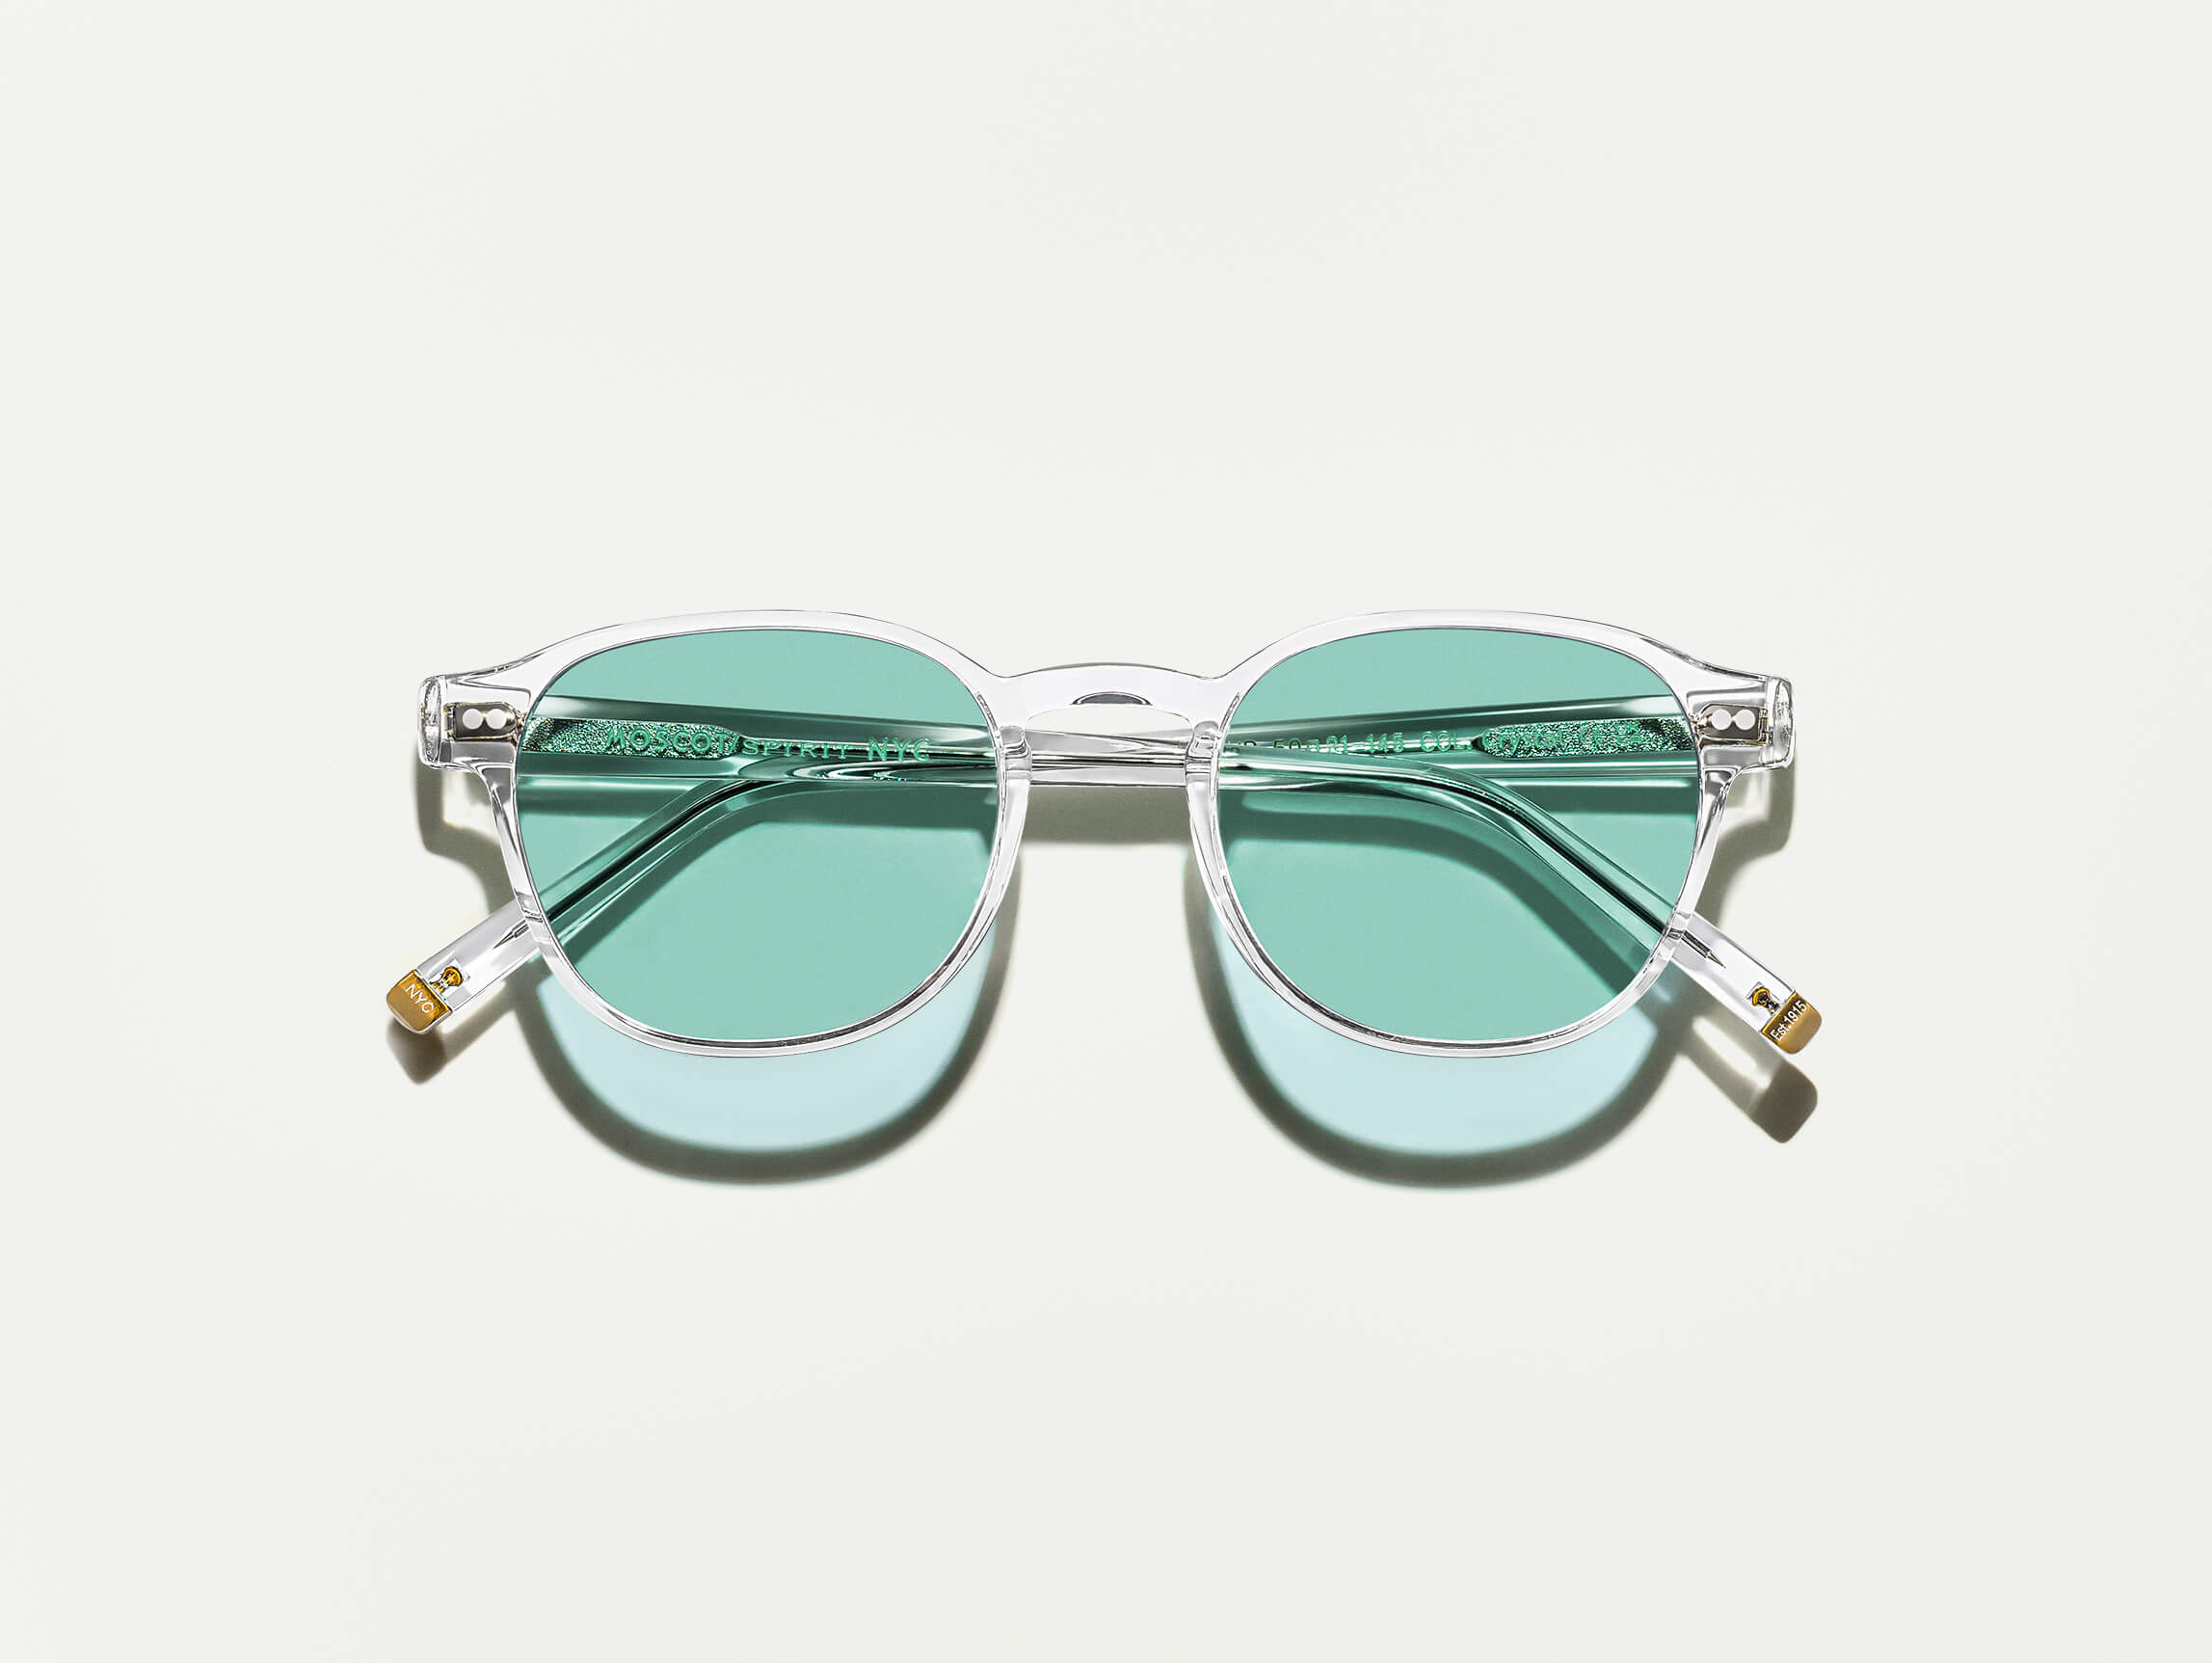 The ARTHUR Crystal with Turquoise Tinted Lenses